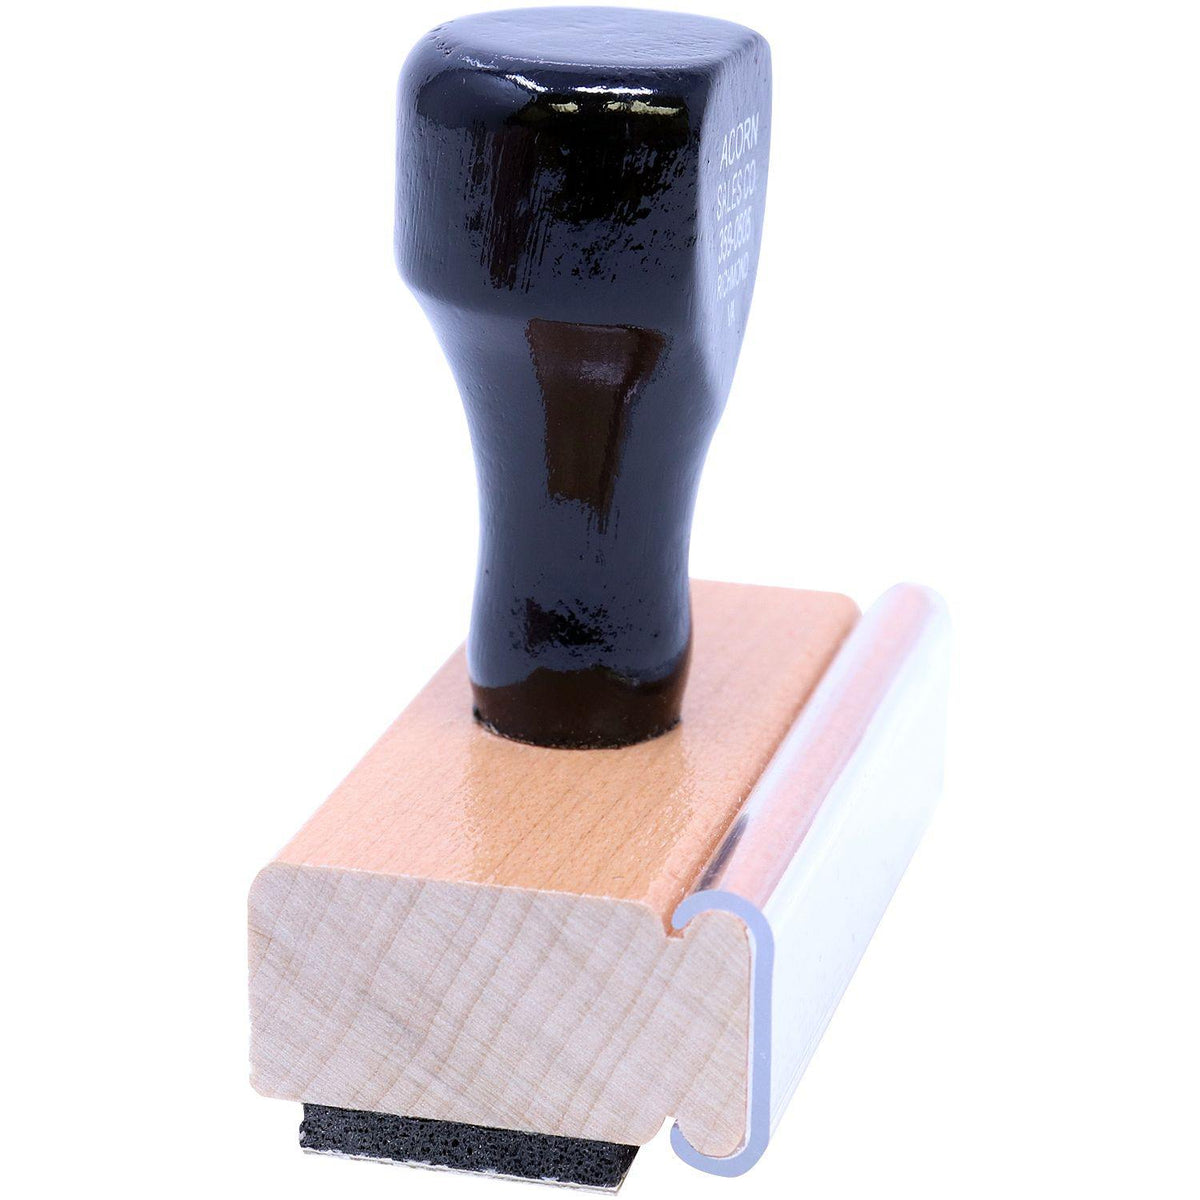 Side View of Insufficient Address Rubber Stamp at an Angle